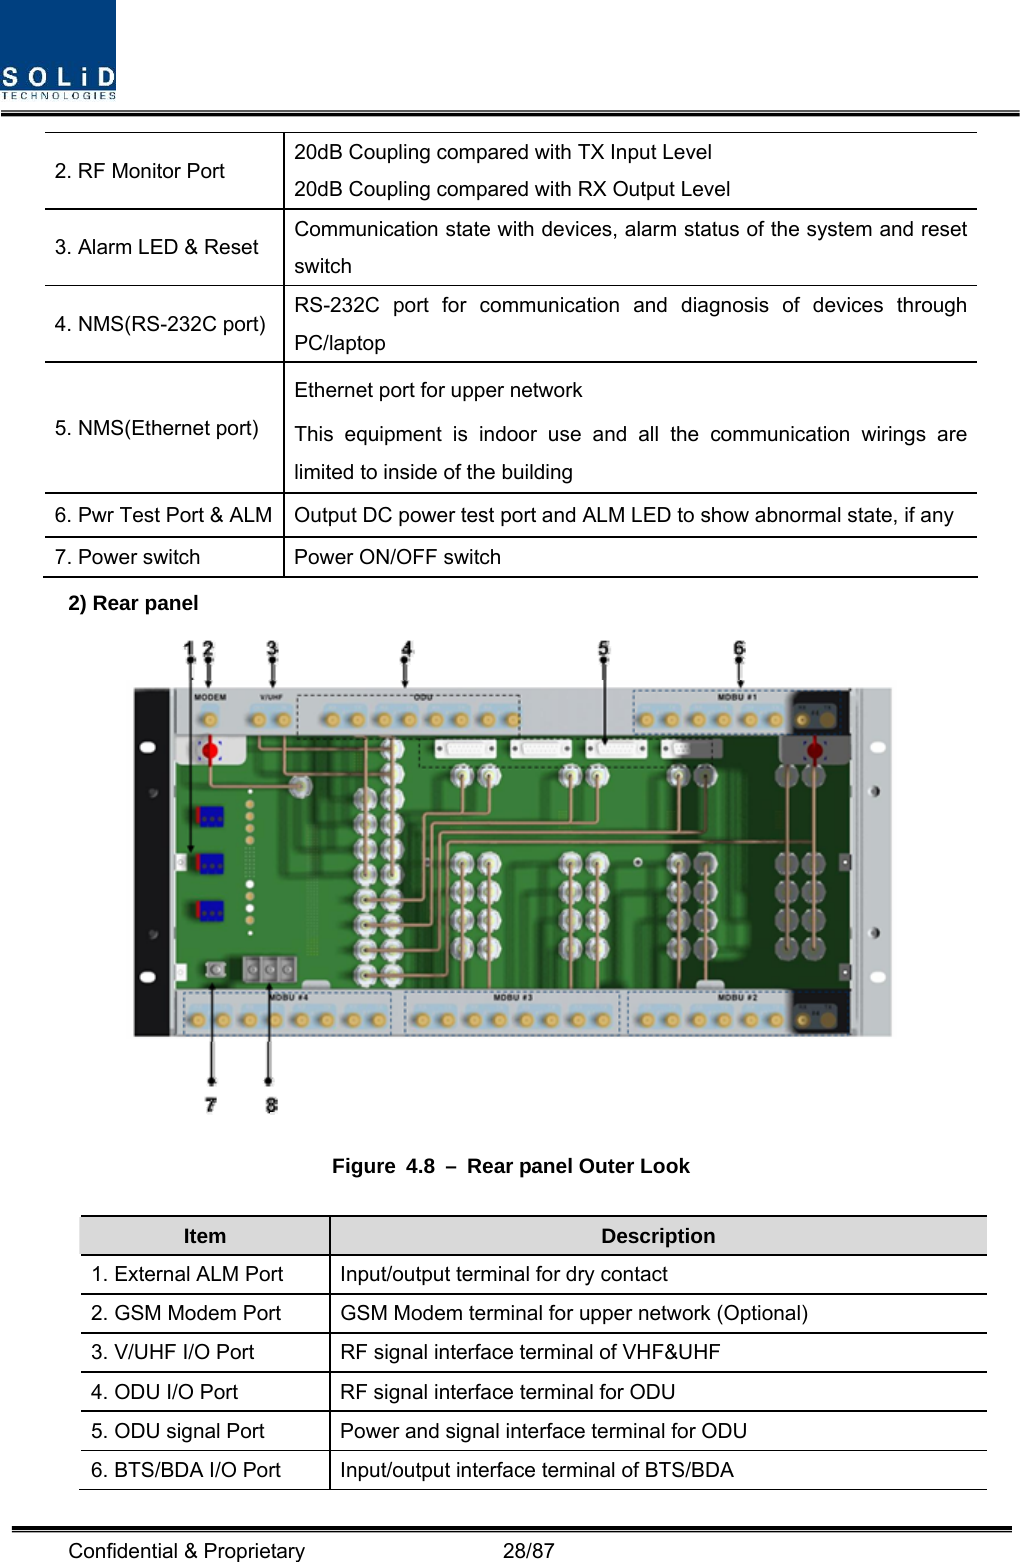  Confidential &amp; Proprietary                   28/87 2. RF Monitor Port  20dB Coupling compared with TX Input Level 20dB Coupling compared with RX Output Level   3. Alarm LED &amp; Reset  Communication state with devices, alarm status of the system and reset switch 4. NMS(RS-232C port) RS-232C port for communication and diagnosis of devices through PC/laptop 5. NMS(Ethernet port) Ethernet port for upper network This equipment is indoor use and all the communication wirings are limited to inside of the building 6. Pwr Test Port &amp; ALM Output DC power test port and ALM LED to show abnormal state, if any 7. Power switch  Power ON/OFF switch 2) Rear panel  Figure 4.8 – Rear panel Outer Look  Item  Description 1. External ALM Port  Input/output terminal for dry contact 2. GSM Modem Port  GSM Modem terminal for upper network (Optional) 3. V/UHF I/O Port  RF signal interface terminal of VHF&amp;UHF 4. ODU I/O Port  RF signal interface terminal for ODU 5. ODU signal Port  Power and signal interface terminal for ODU 6. BTS/BDA I/O Port  Input/output interface terminal of BTS/BDA 